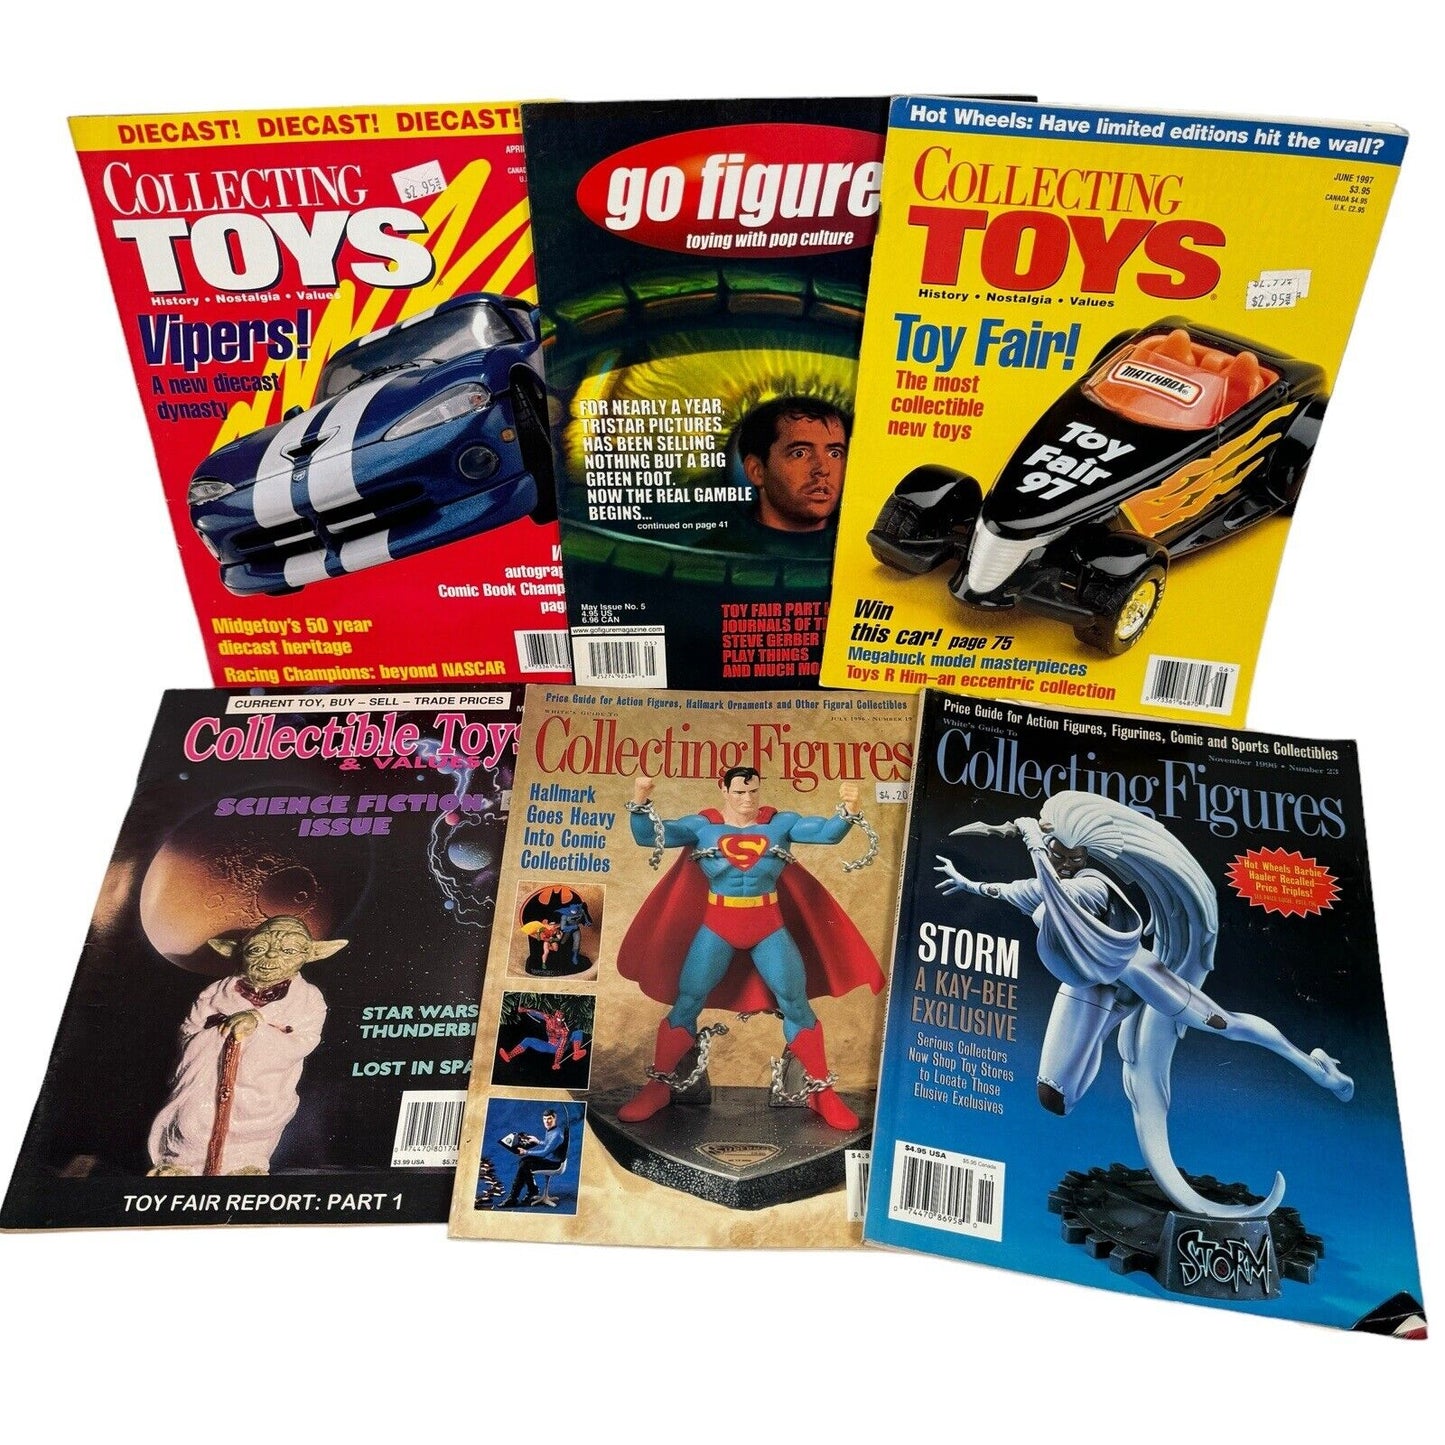 Lot Of 6 Action Figure Collecting Magazines Go Figure Collecting Toys & Figures